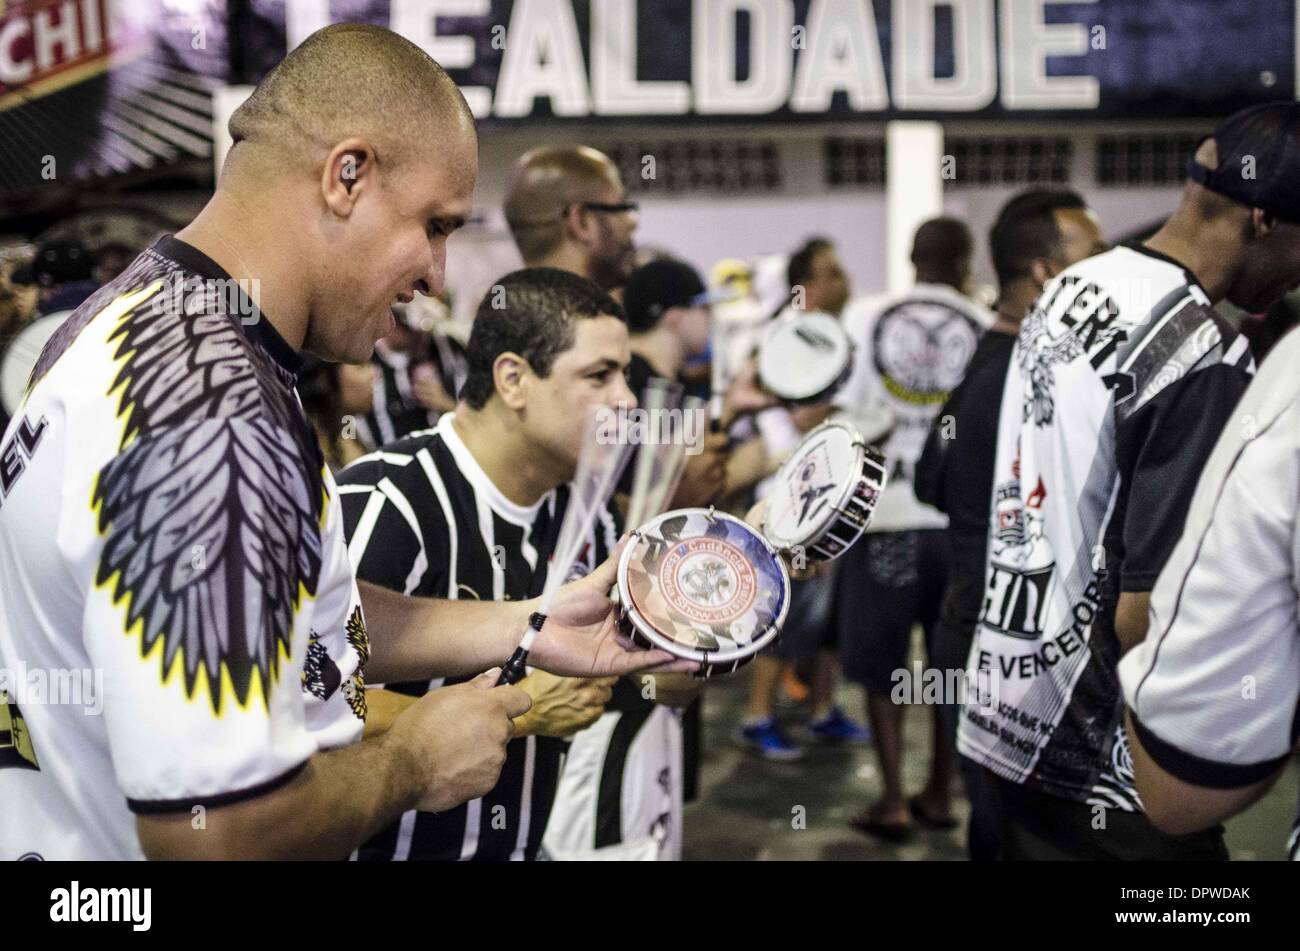 Jan. 14, 2014 - Sao Paulo, Sao Paulo, Brazil - Members of the ''Escola de Samba'' ''Gavioes da Fiel'' rehearse at their court, in central Sao Paulo, this tuesday - 14/01/2014. Supported by the biggest organized group fans, of the football club Corinthians, Gavioes has won the Carnaval title four times. ''Escolas de Samba'' are like teams, and spent one whole year getting prepared for one year for 1h of parade on Carnival, competing for the title of the best one. Sao Paulo's carnival is the second biggest in Brasil, after Rio's. (Credit Image: © Gustavo Basso/NurPhoto/ZUMAPRESS.com) Stock Photo